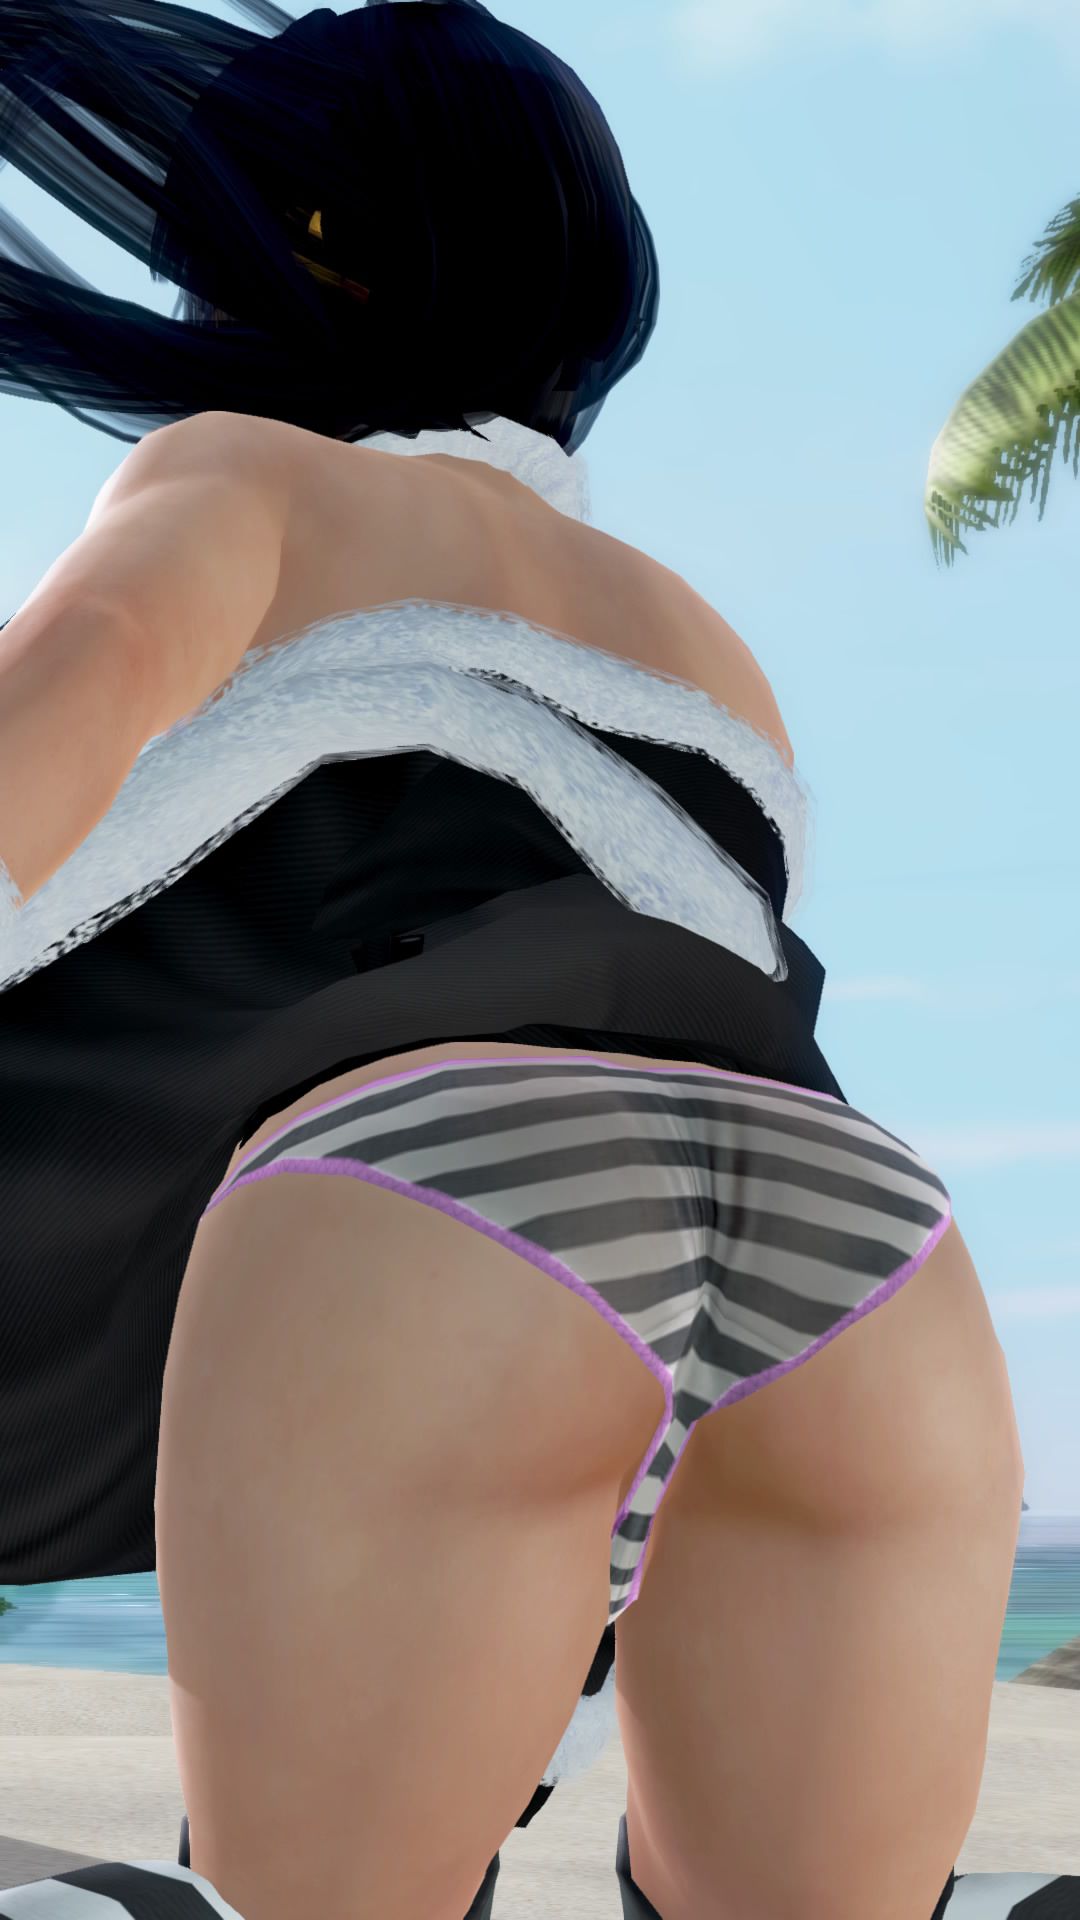 Merry Xmas from DOAX3 South Island! Photo session with new swimsuit Santa 39